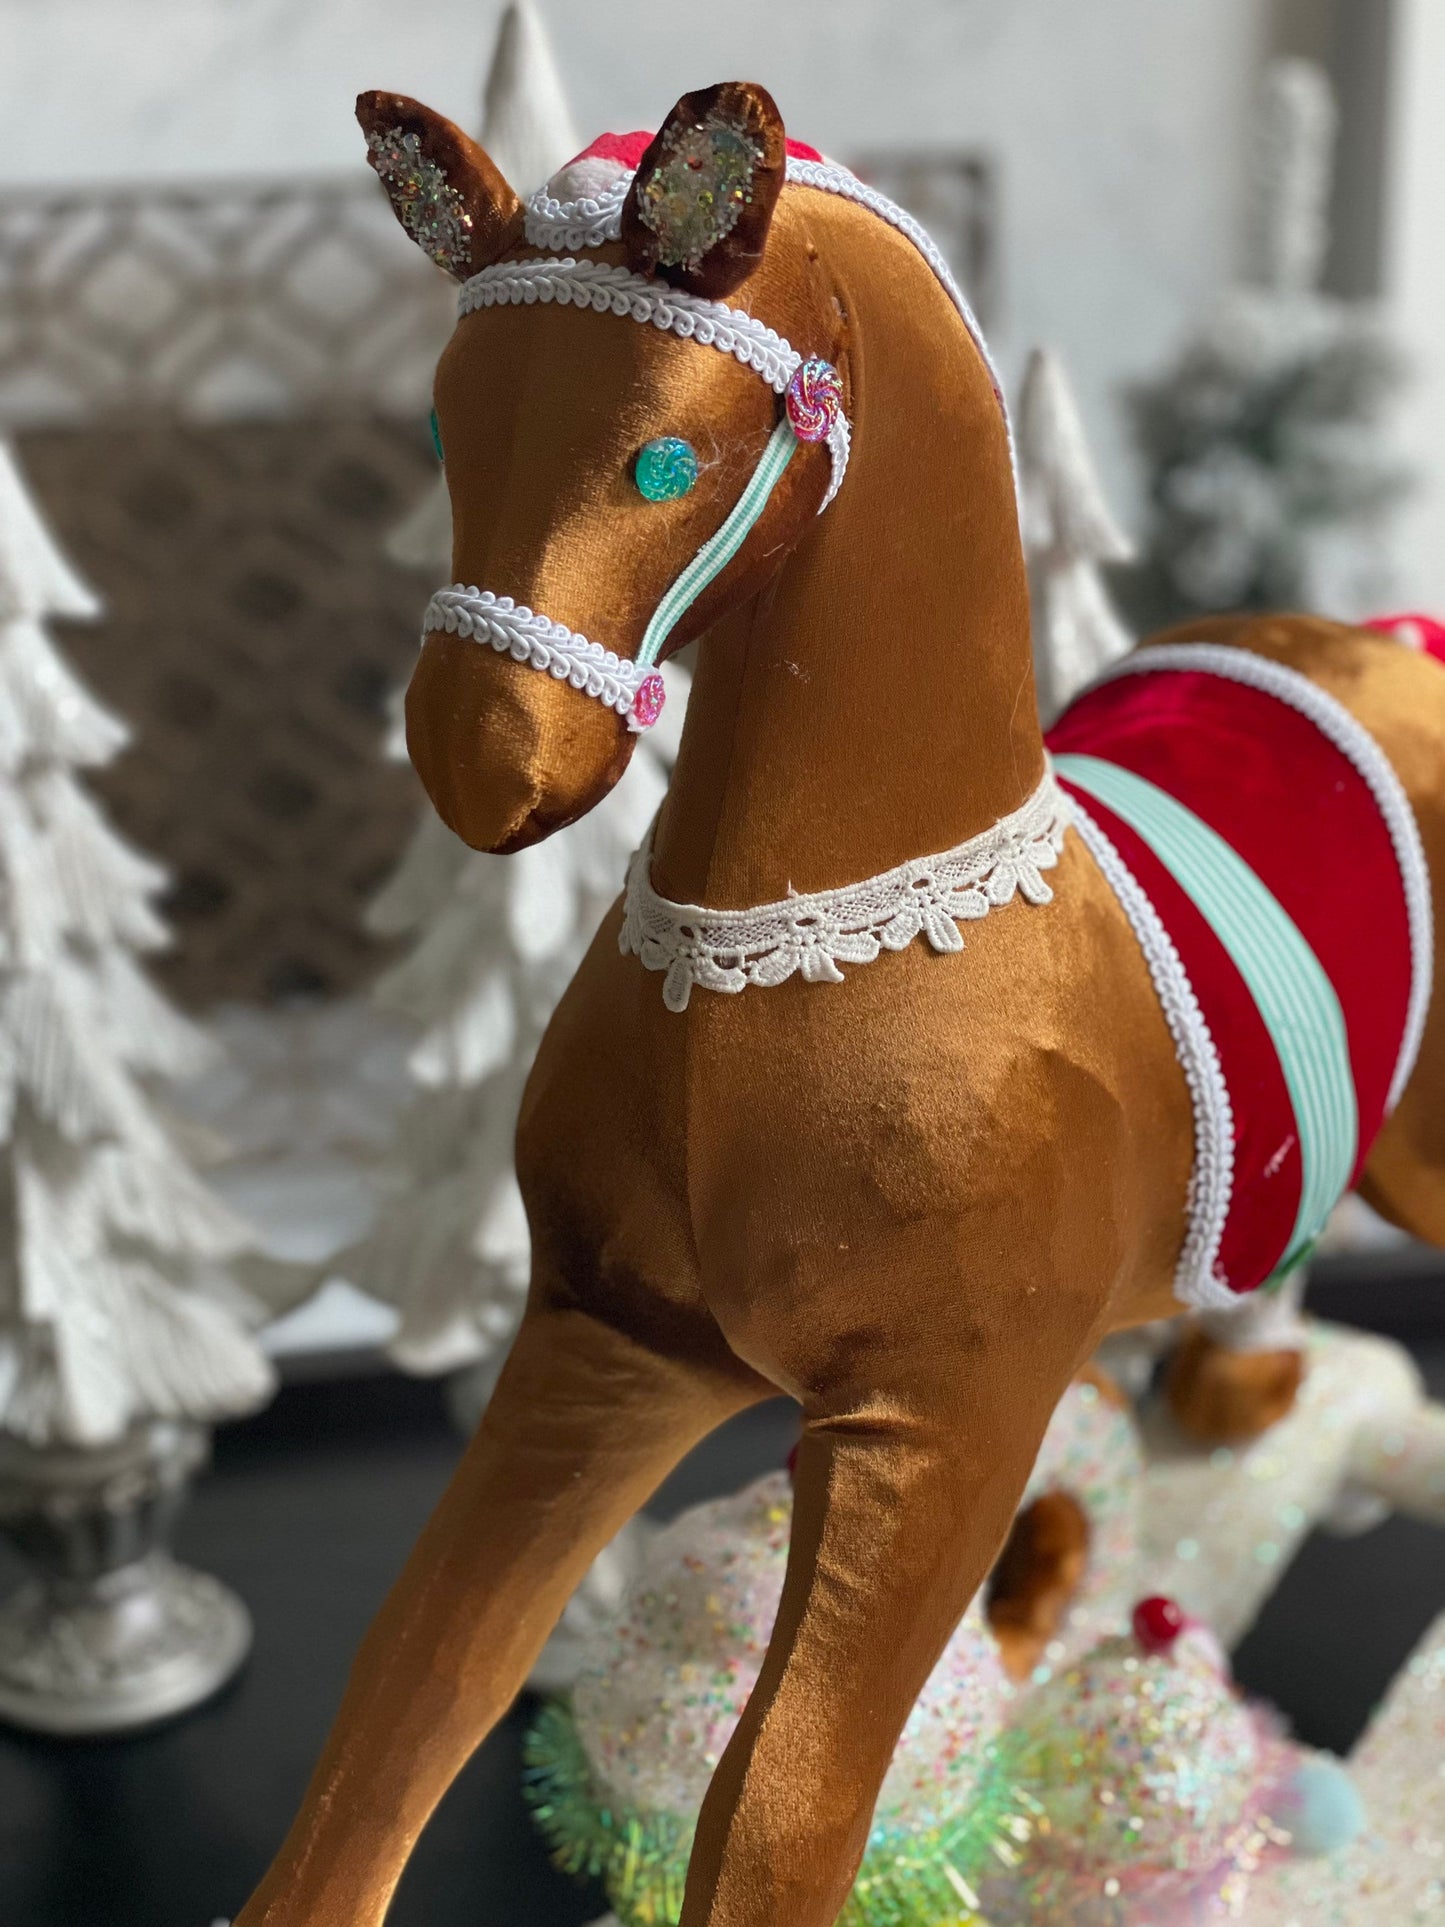 23”Hx 27” W. Rocking horse with cupcakes and donuts. One rocking horse.